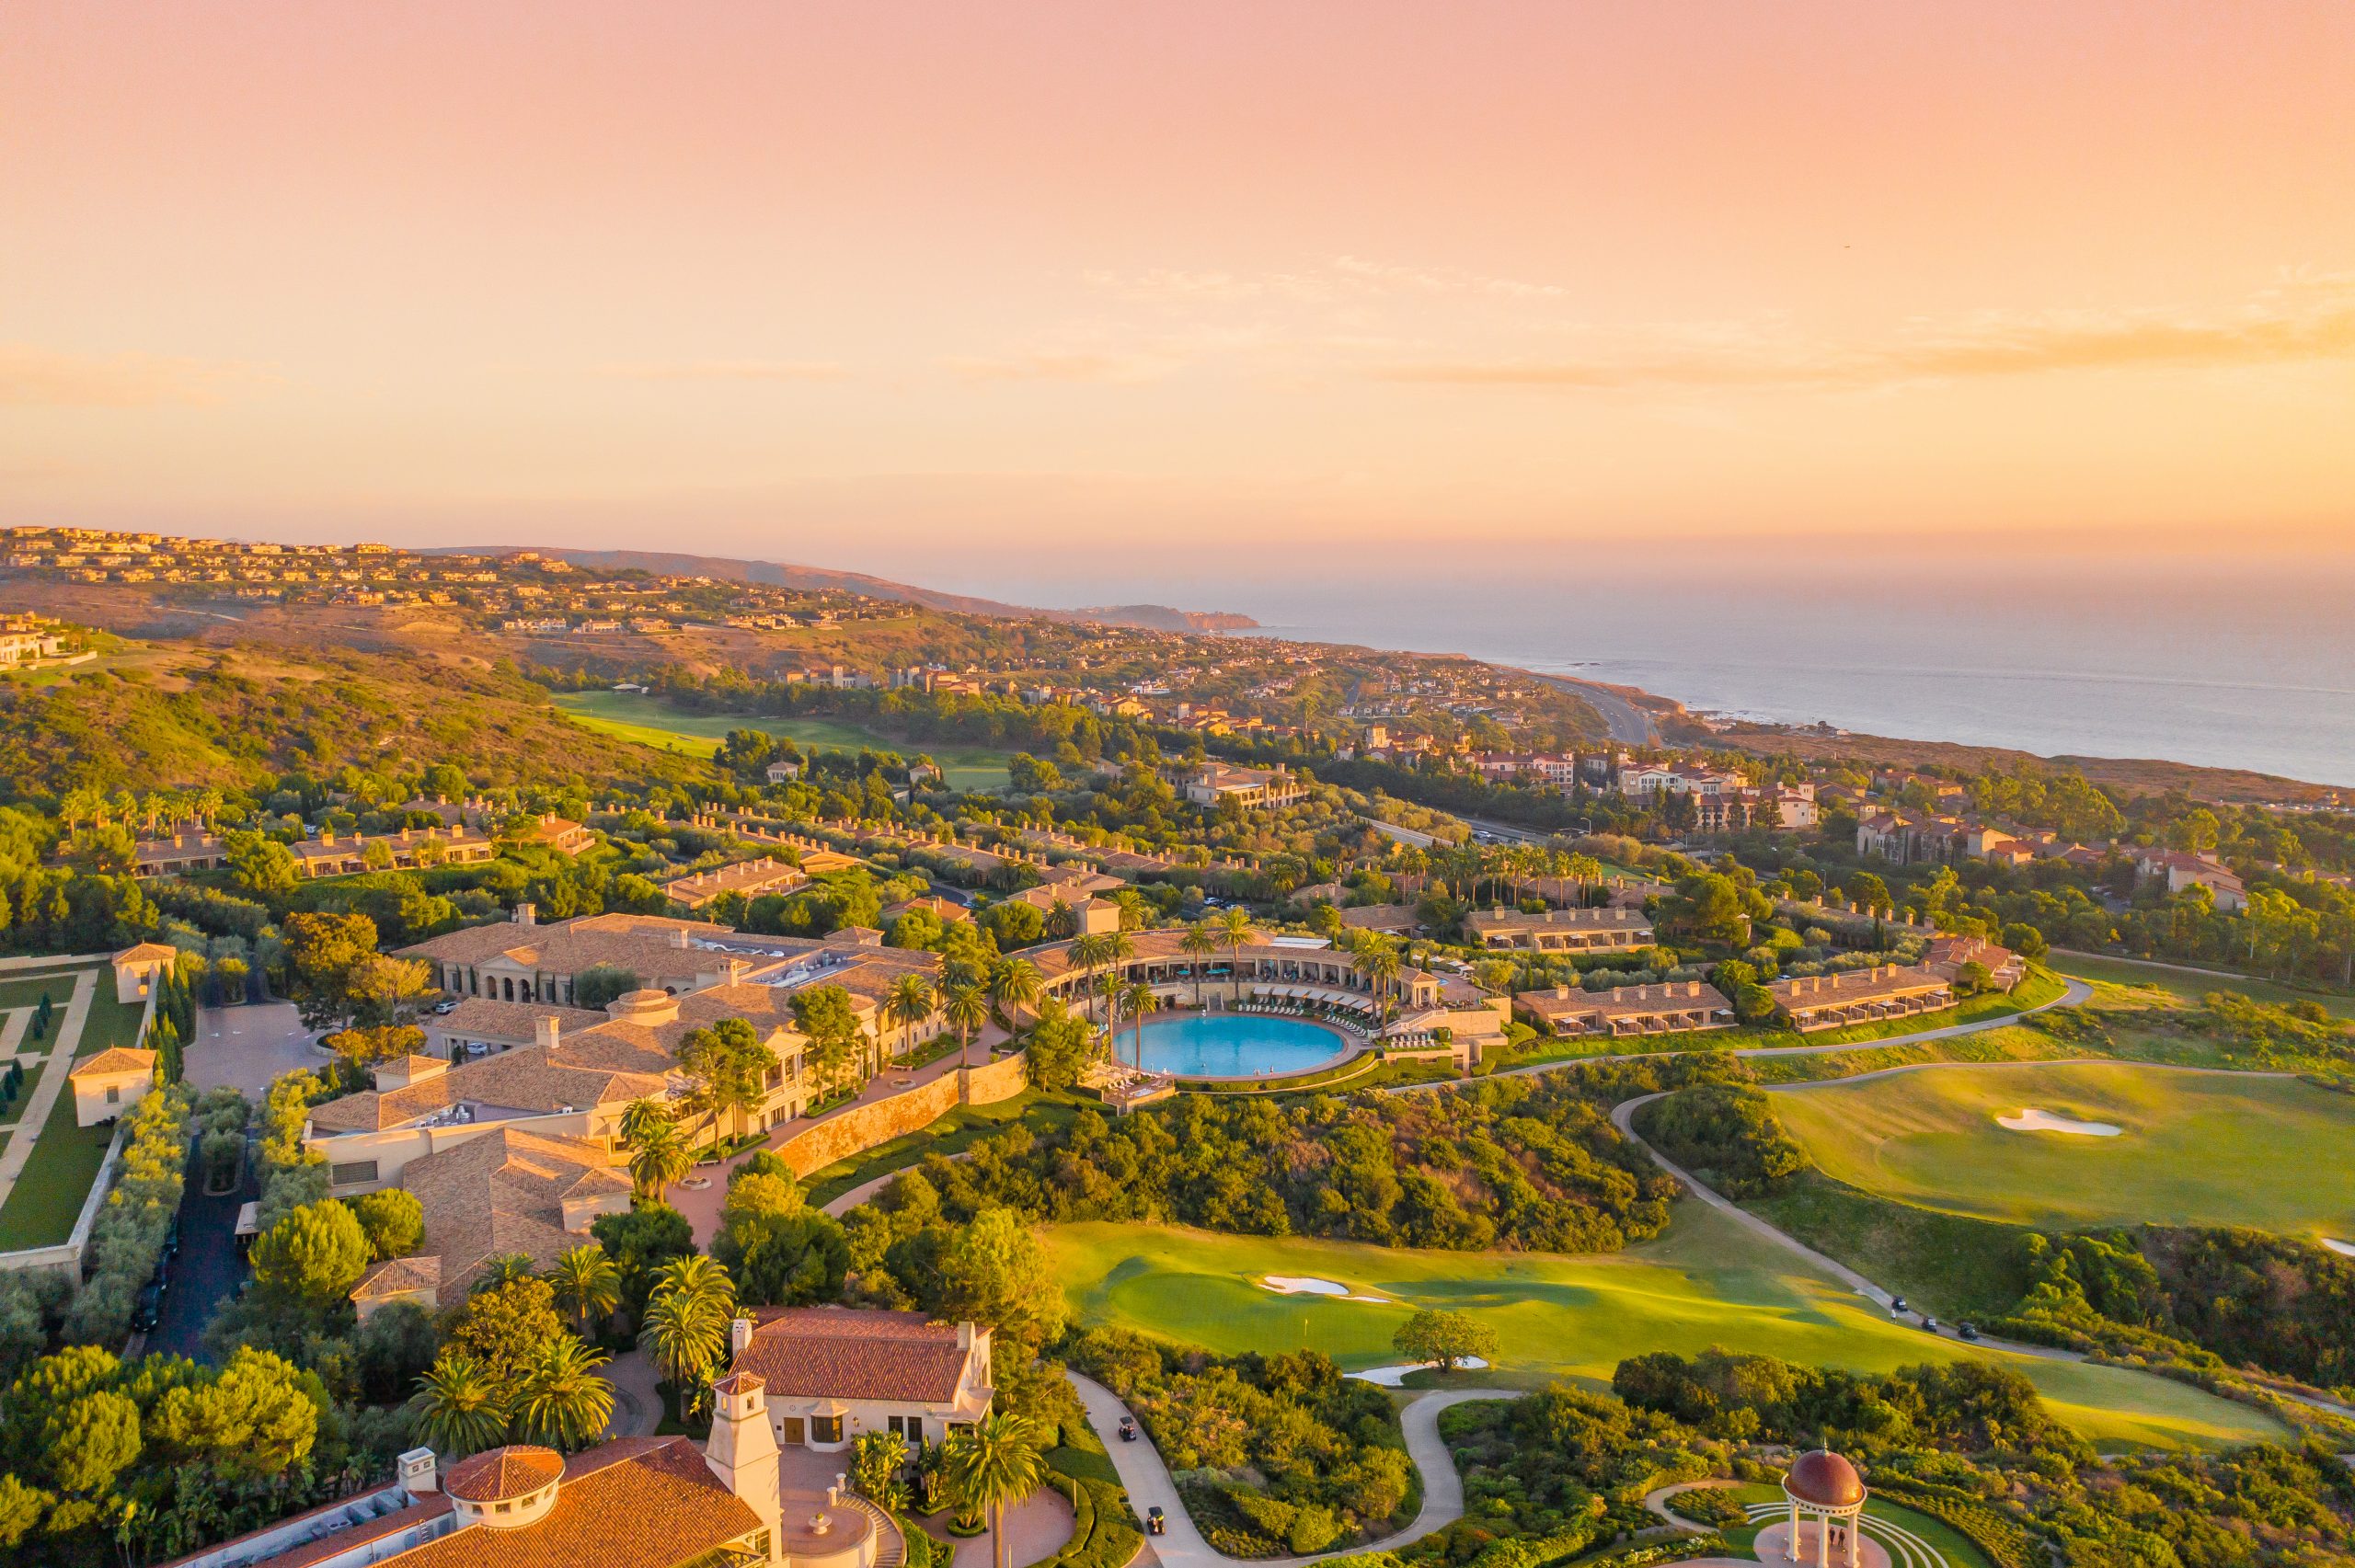 A Fun Getaway to Pelican Hill with the Hubby